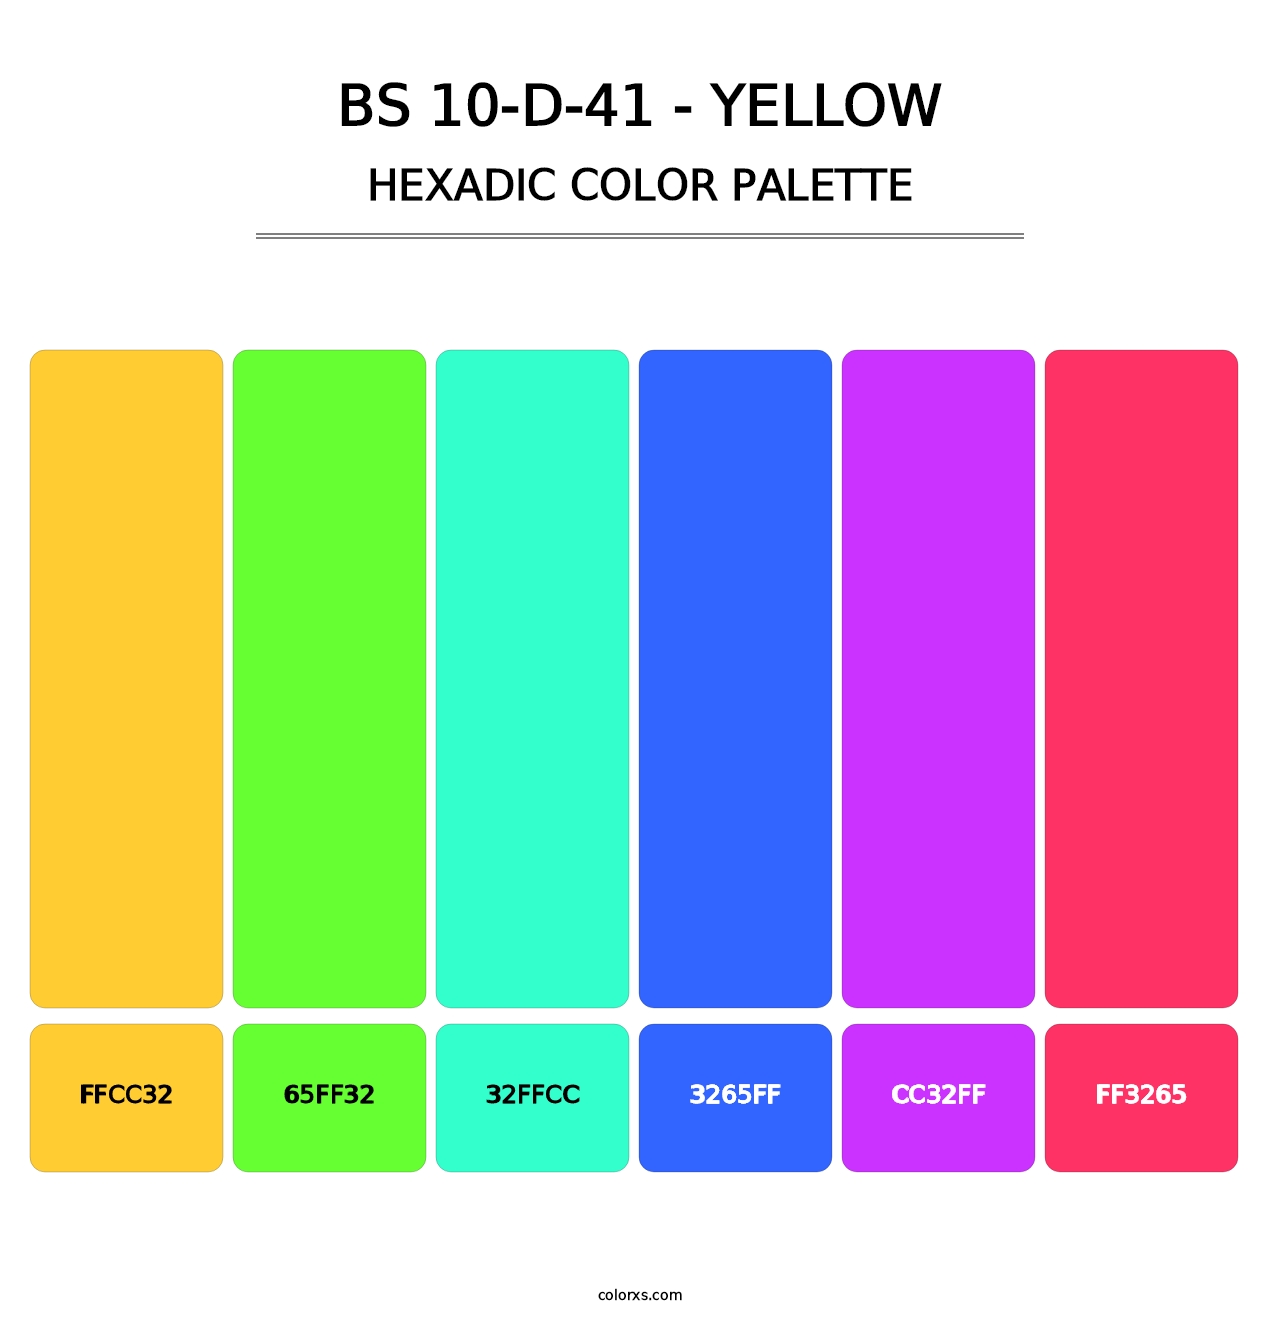 BS 10-D-41 - Yellow - Hexadic Color Palette